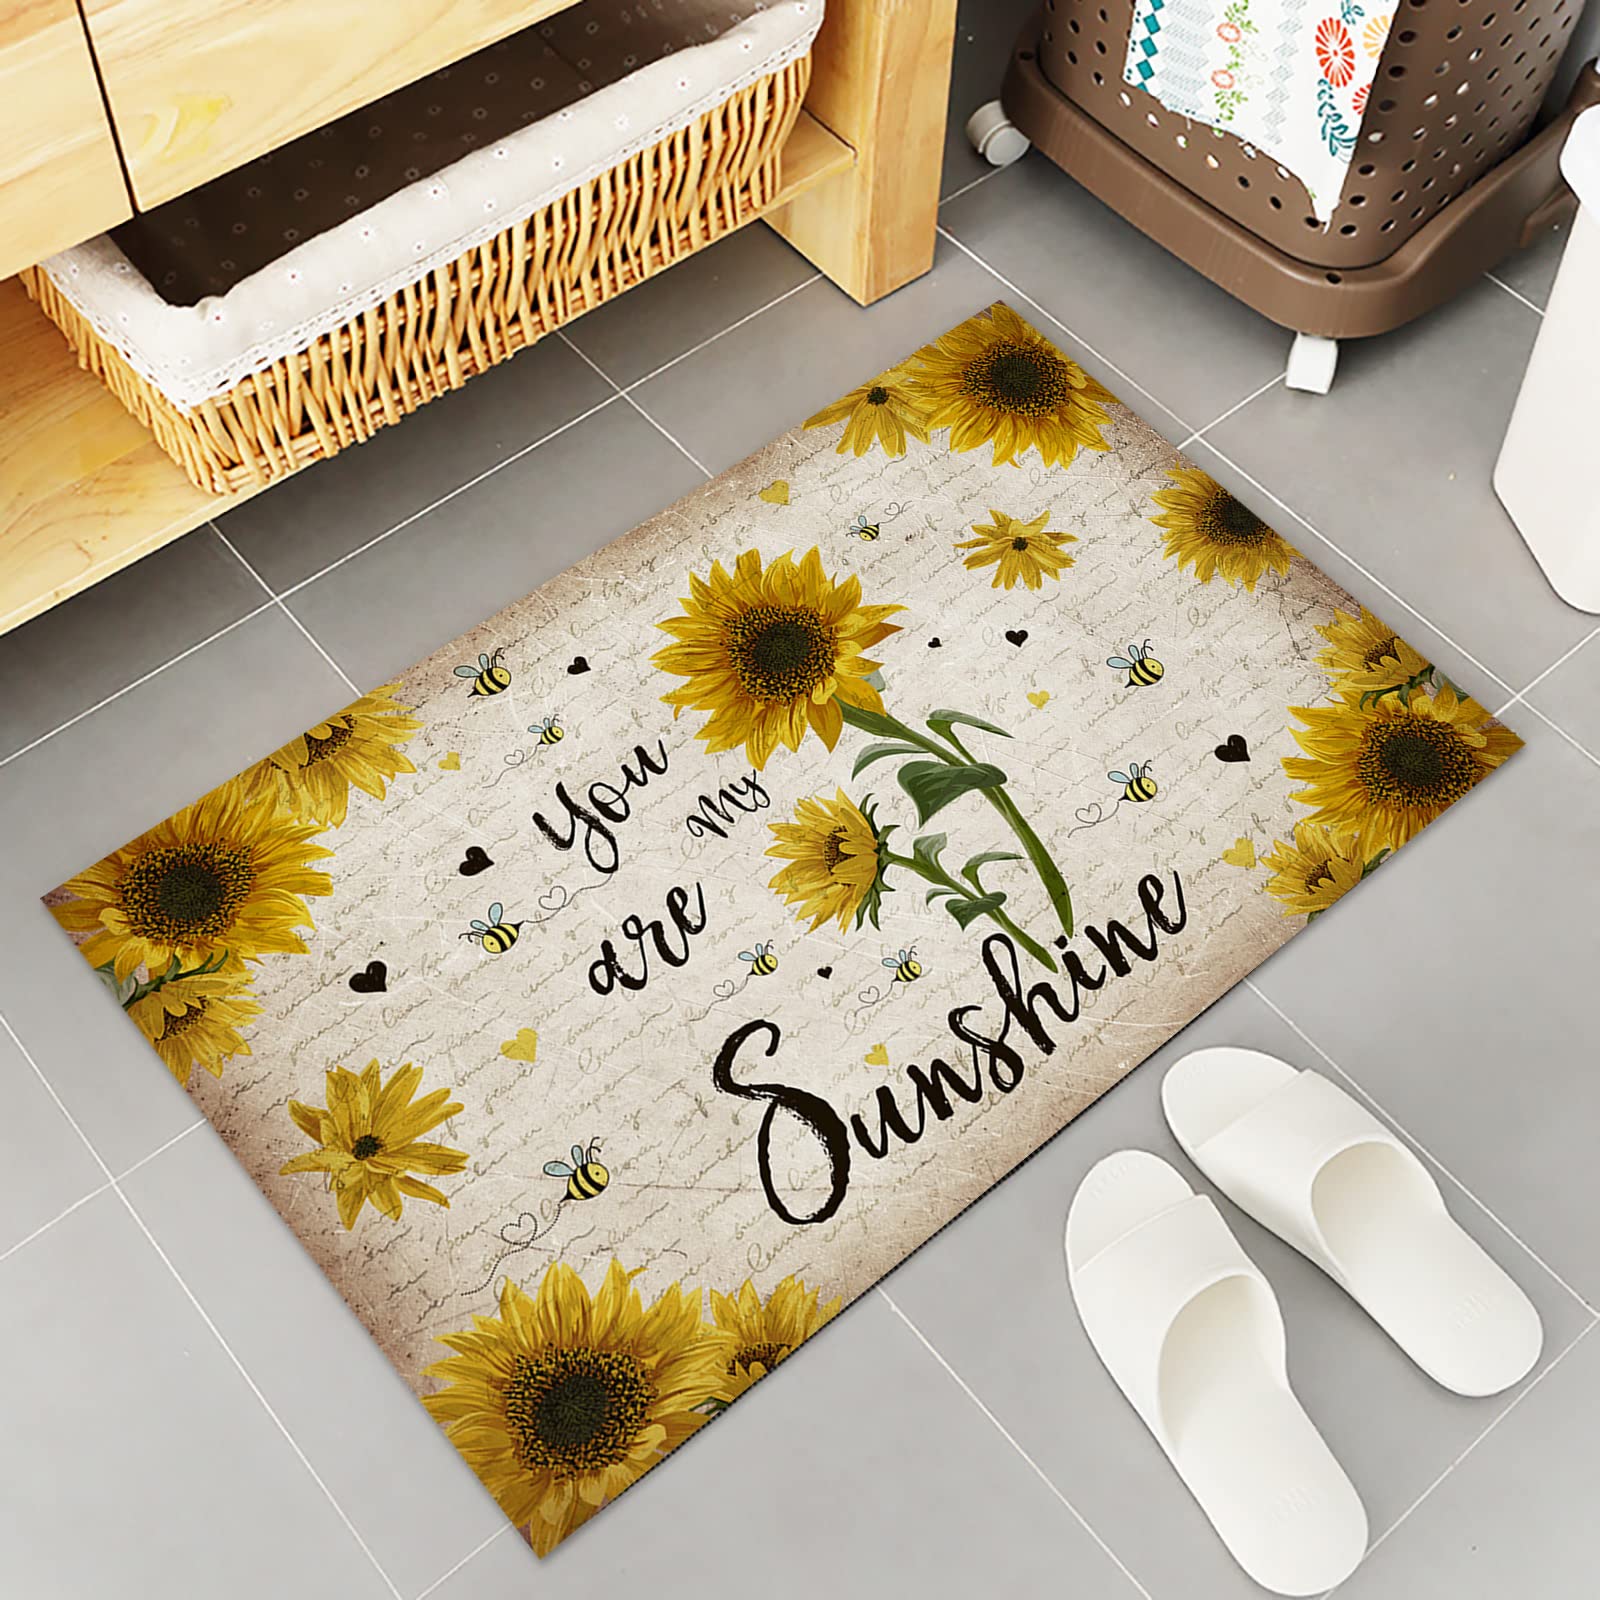 Rustic Sunflower Kitchen Rugs Sets 2 Piece Floor Mats You are My Sunshine Farmhouse Bees Durable Doormat Non-Slip Rubber Backing Area Rugs Washable Carpet Inside Door Mat Pad Sets 16"x24"+16"x47"